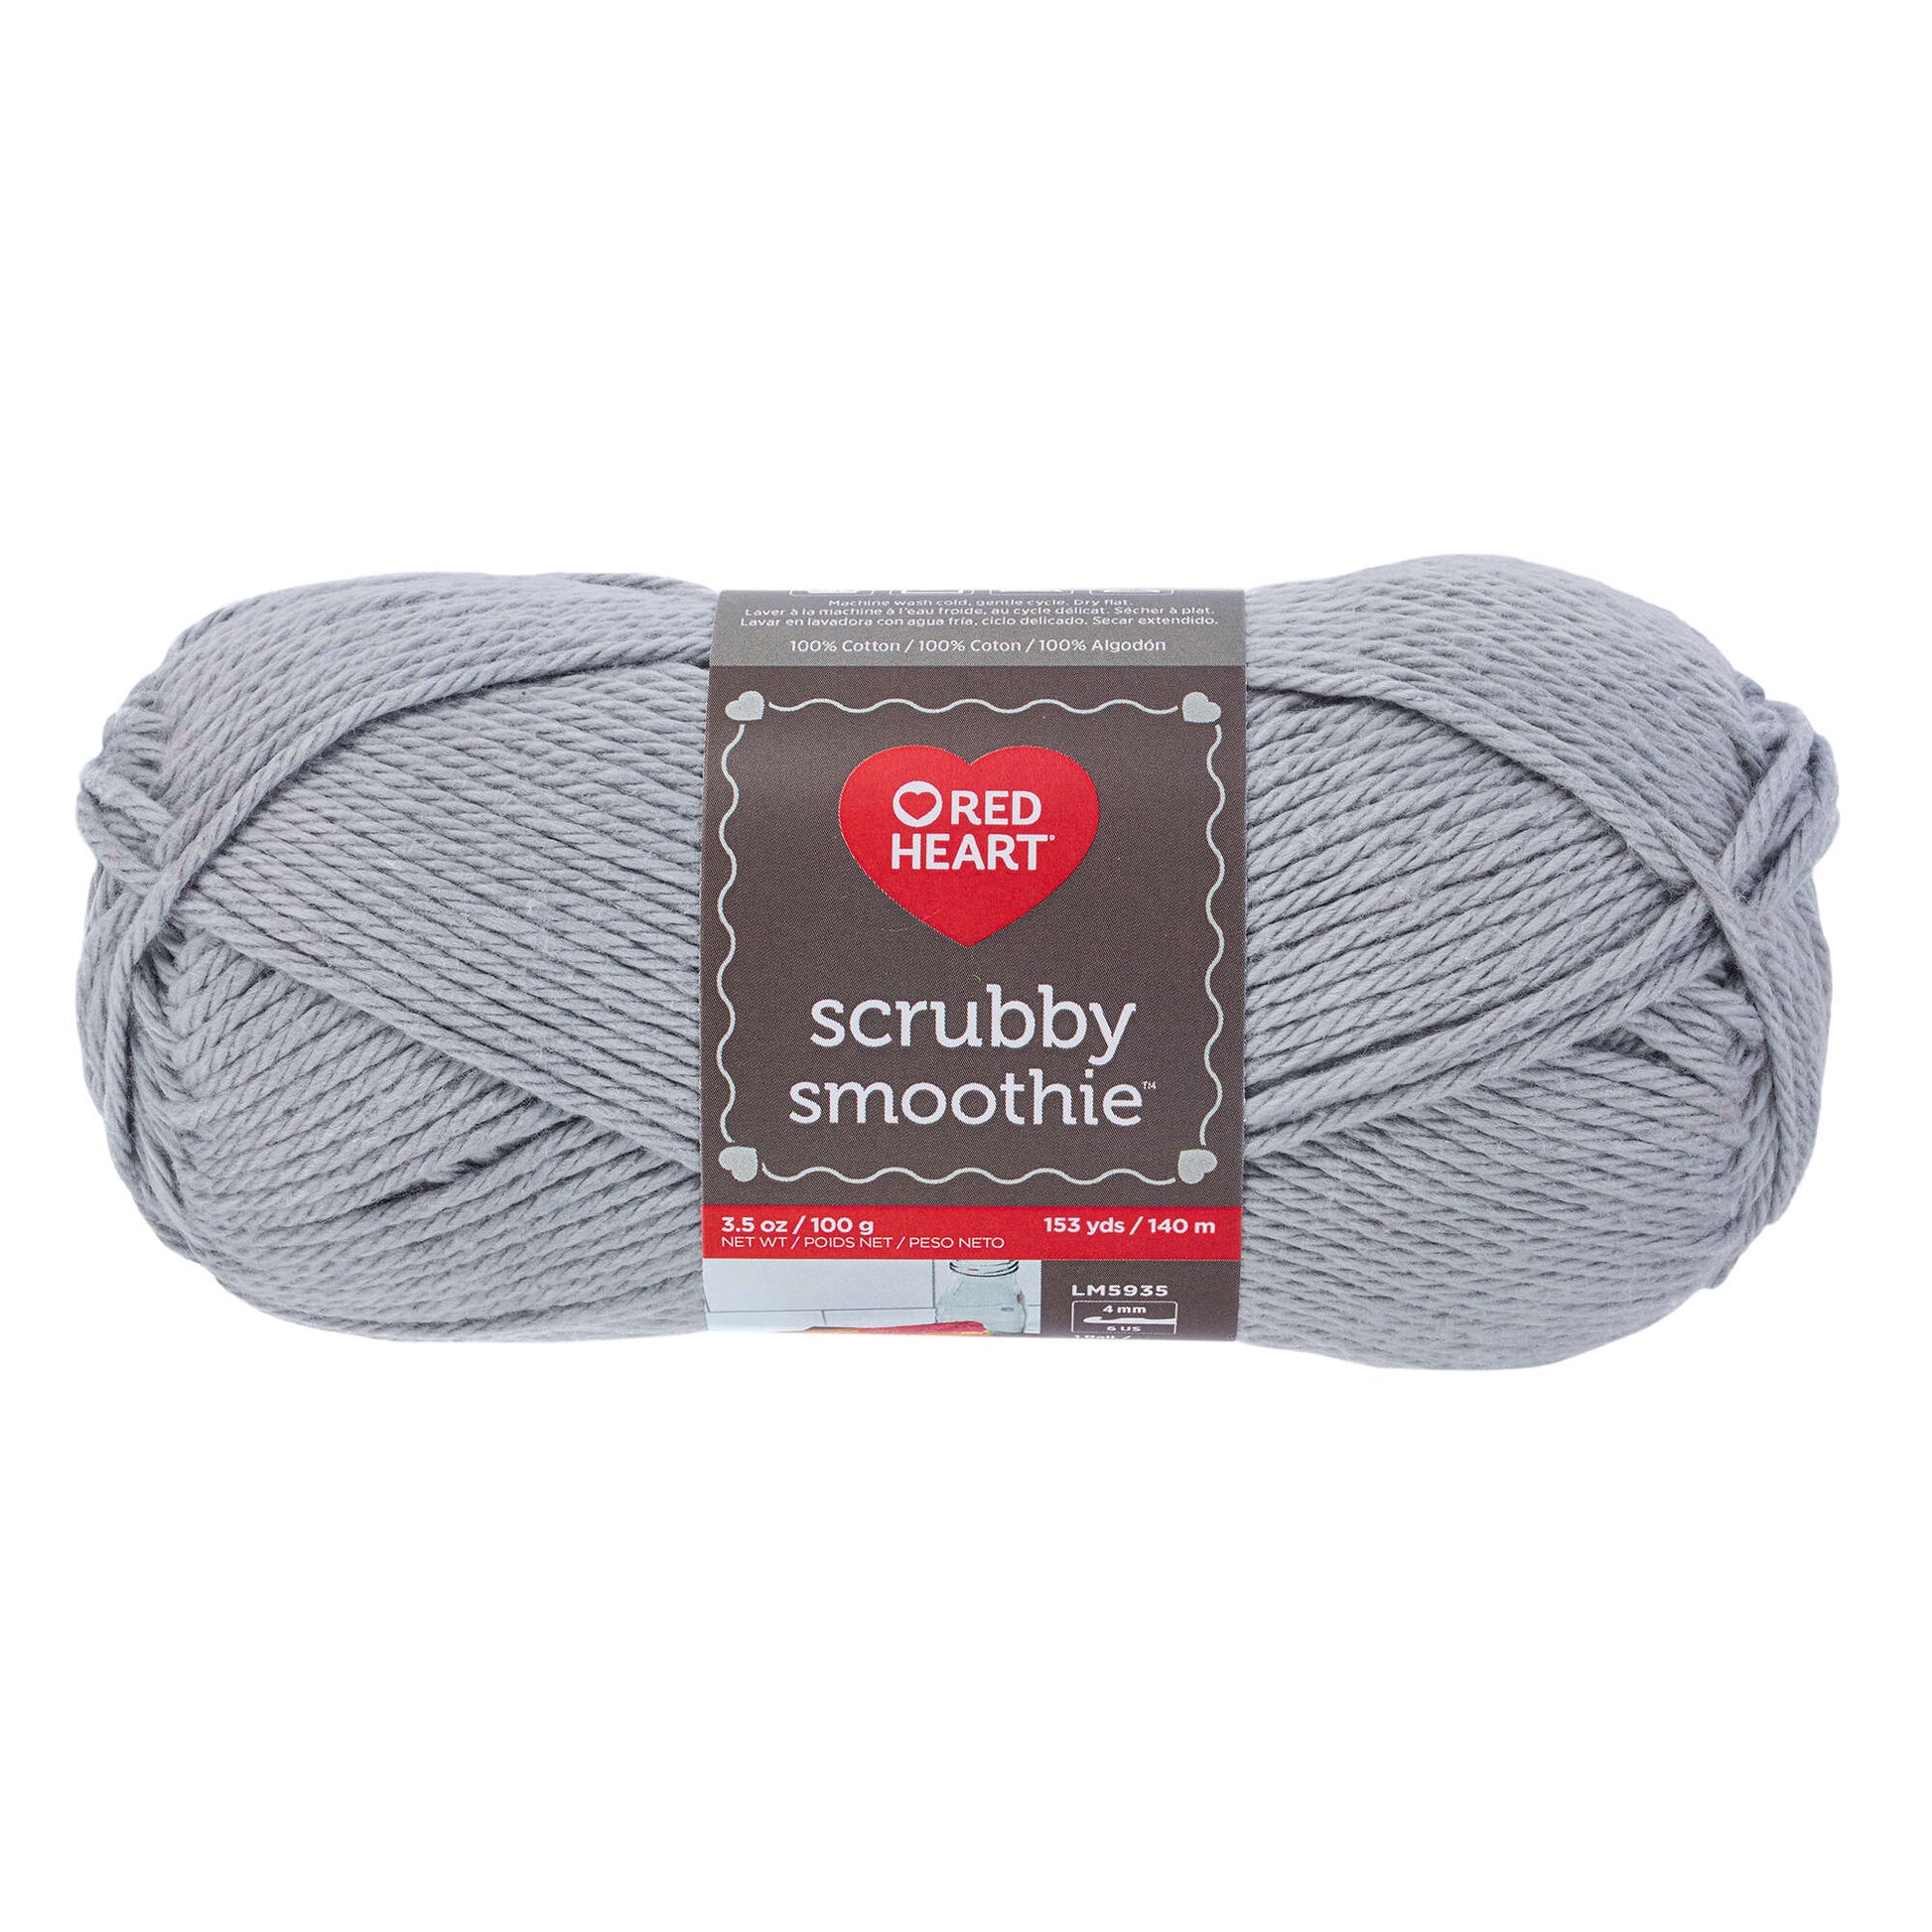 Red Heart Scrubby Smoothie Yarn - Clearance shades Gray